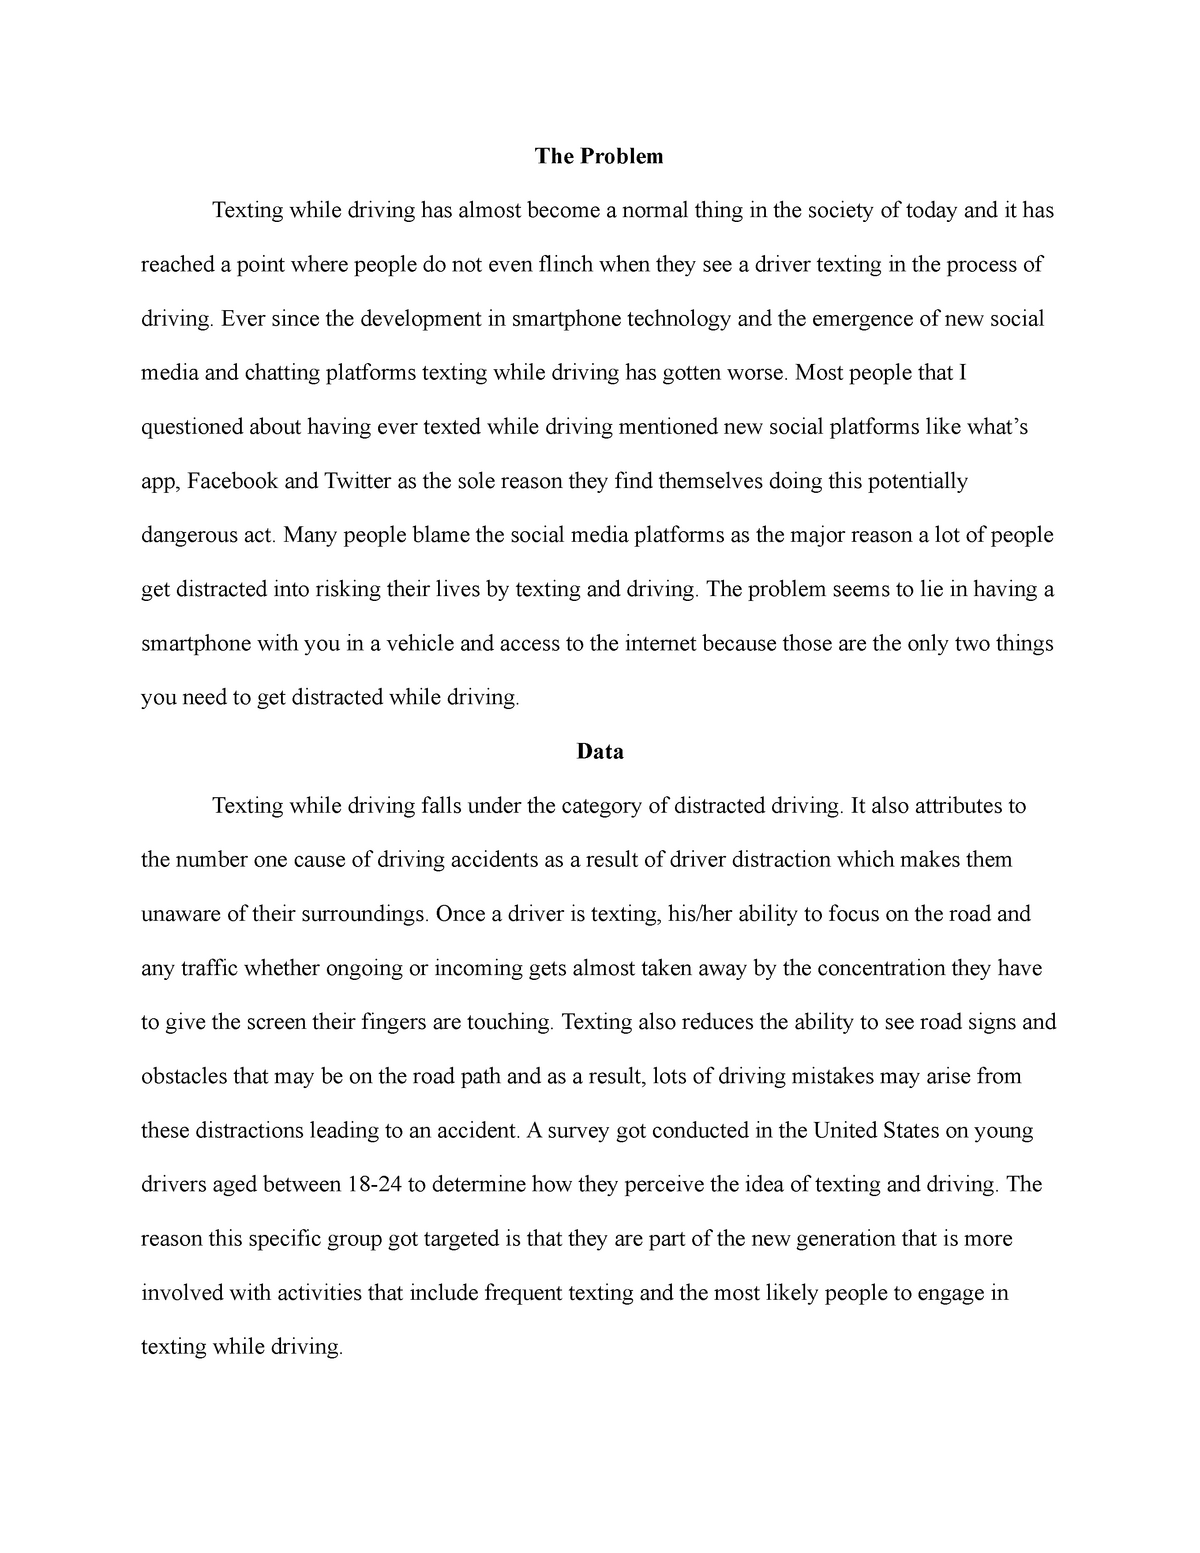 texting and driving essay